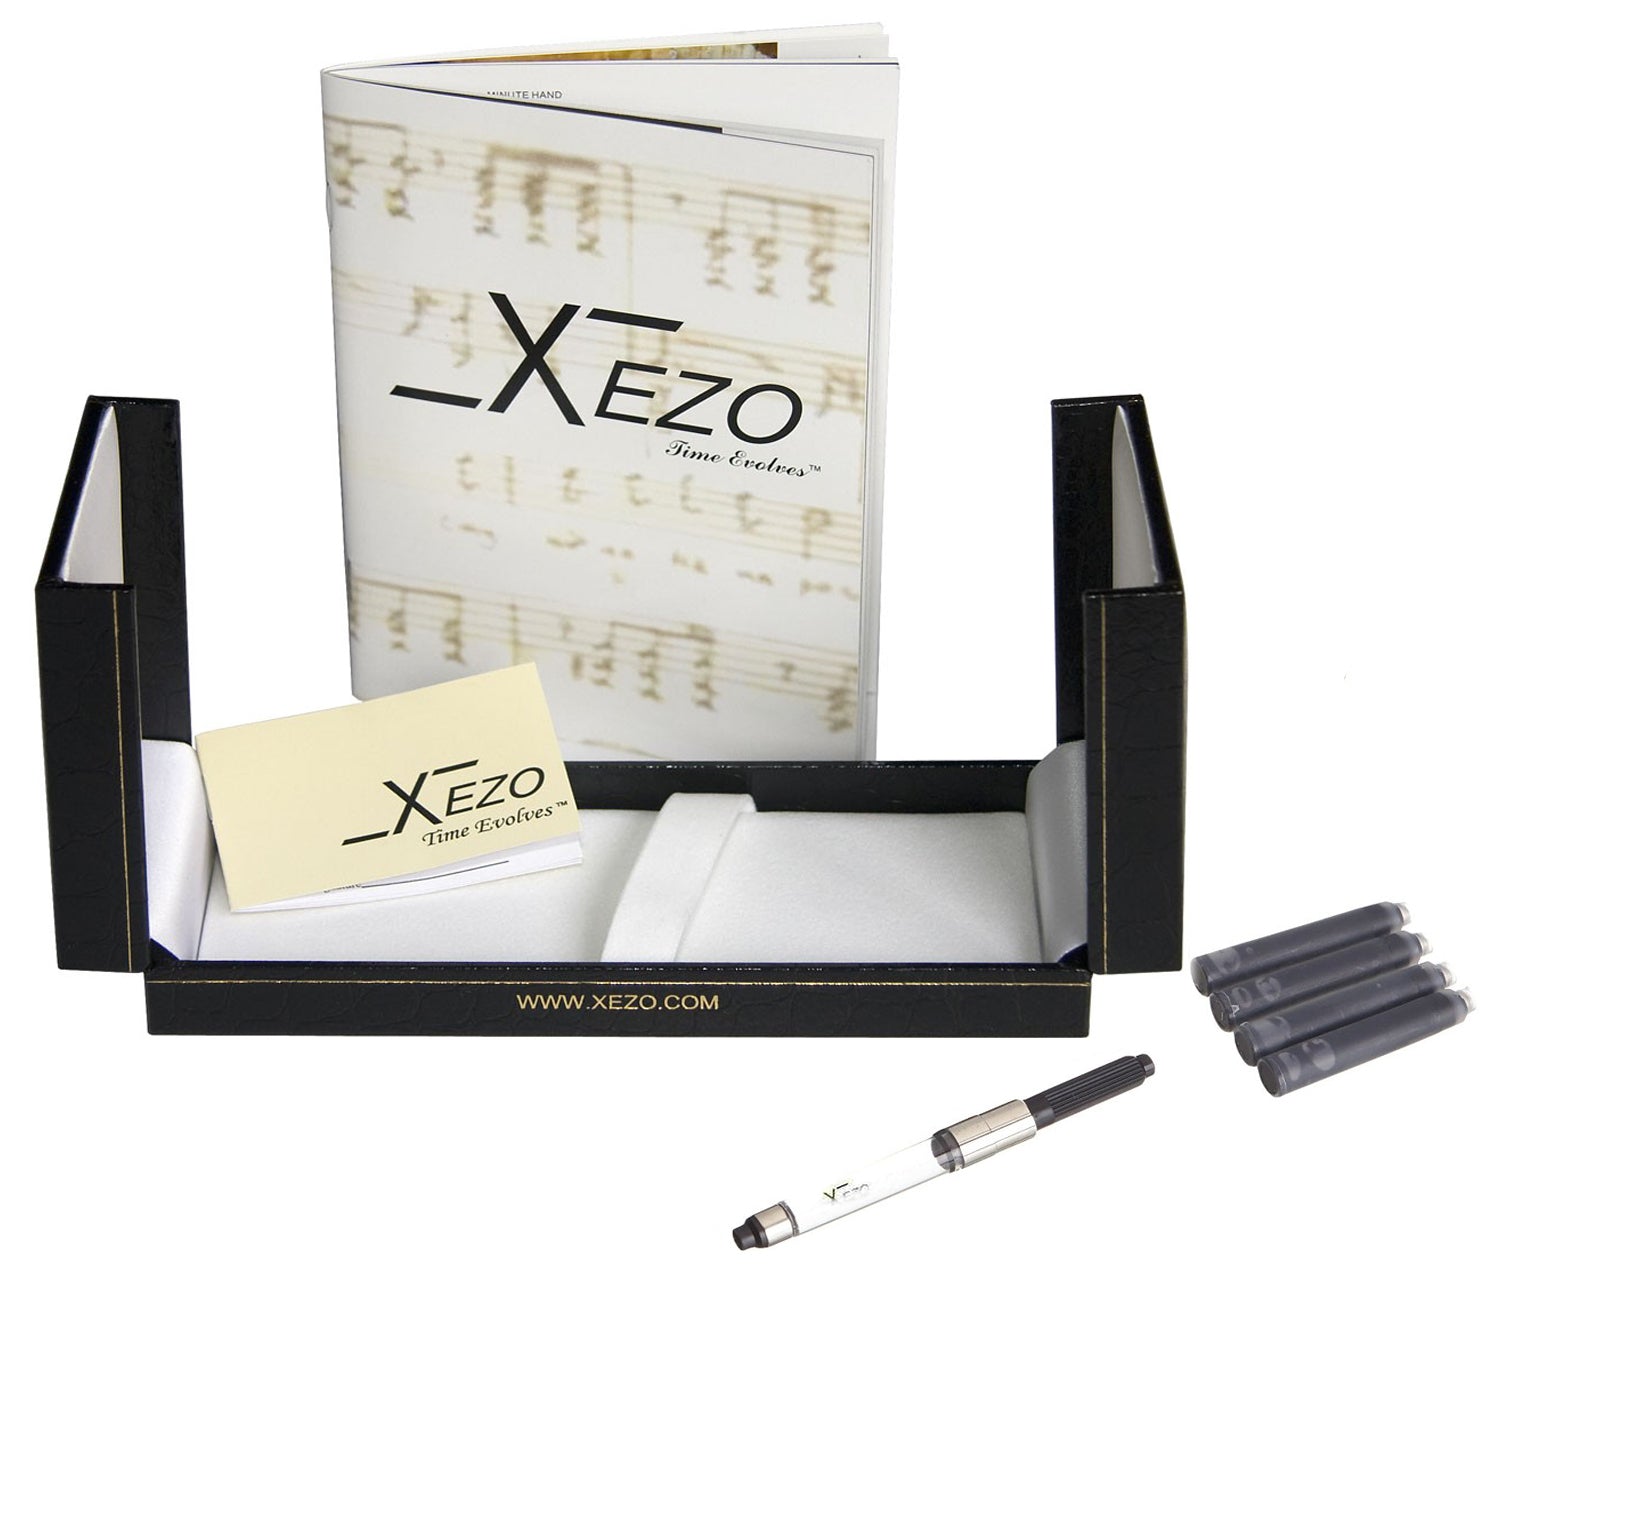 Xezo - Black gift box, certificate, manual, chrome-plated ink converter, and four ink cartridges of the Urbanite Brown F fountain pen